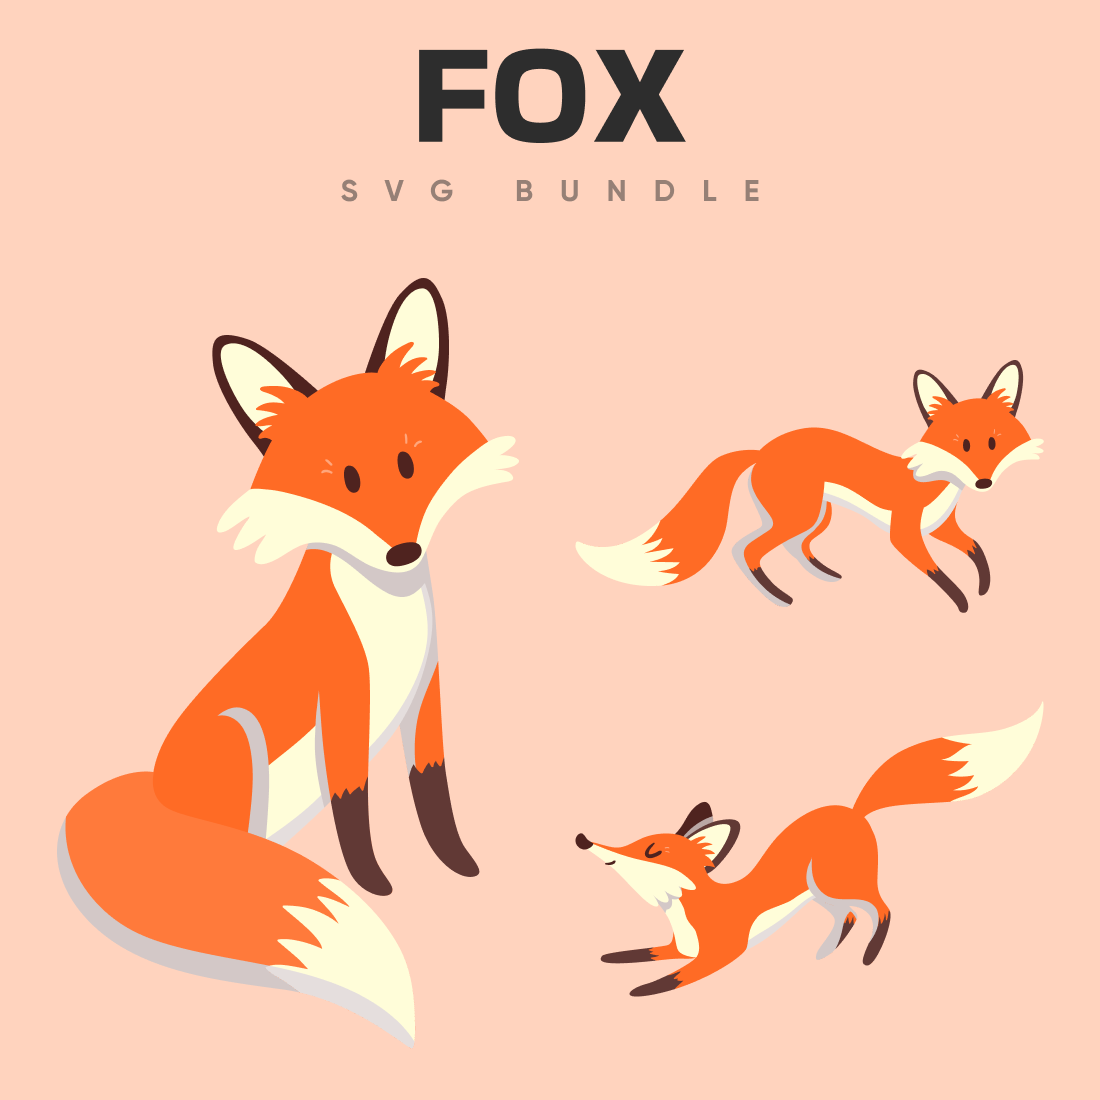 Set of three fox illustrations on a pink background.